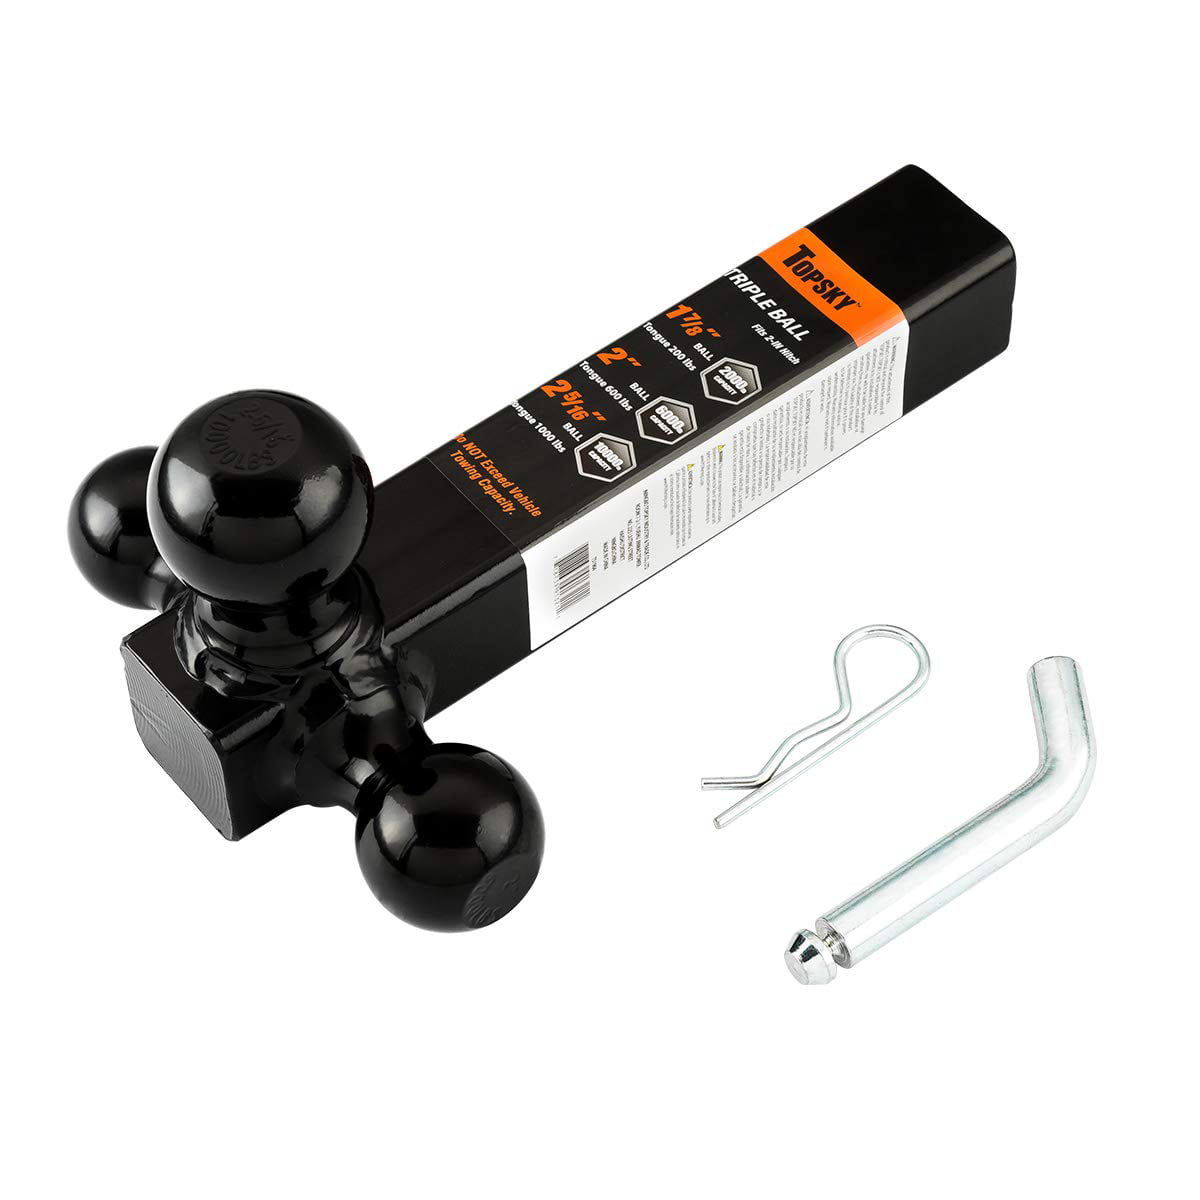 TOPSKY Trailer Hitch 1-7/8,2&2-5/16 Trailer Ball Mount with Hitch Hook & Hitch pin TS1910,Tow Hitch,Hitch Ball 